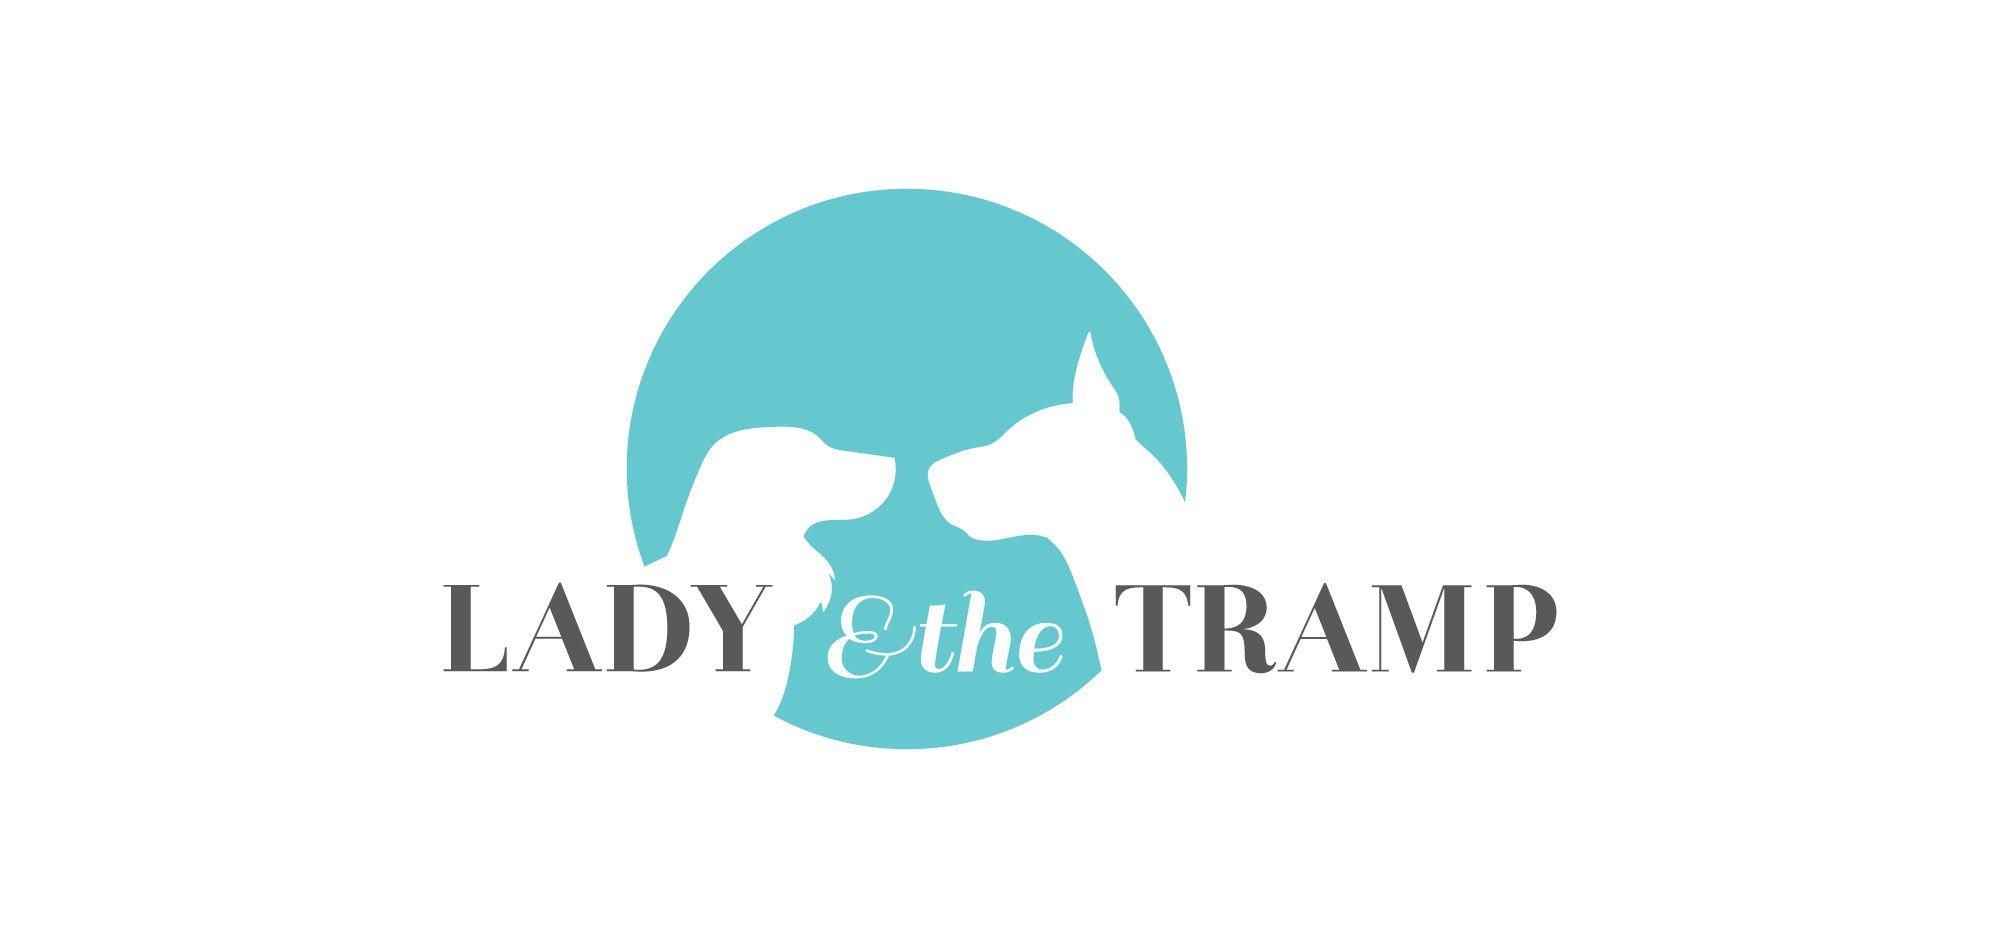 Lady and the Tramp Logo - Lady & the Tramp's Business Branding design, website design